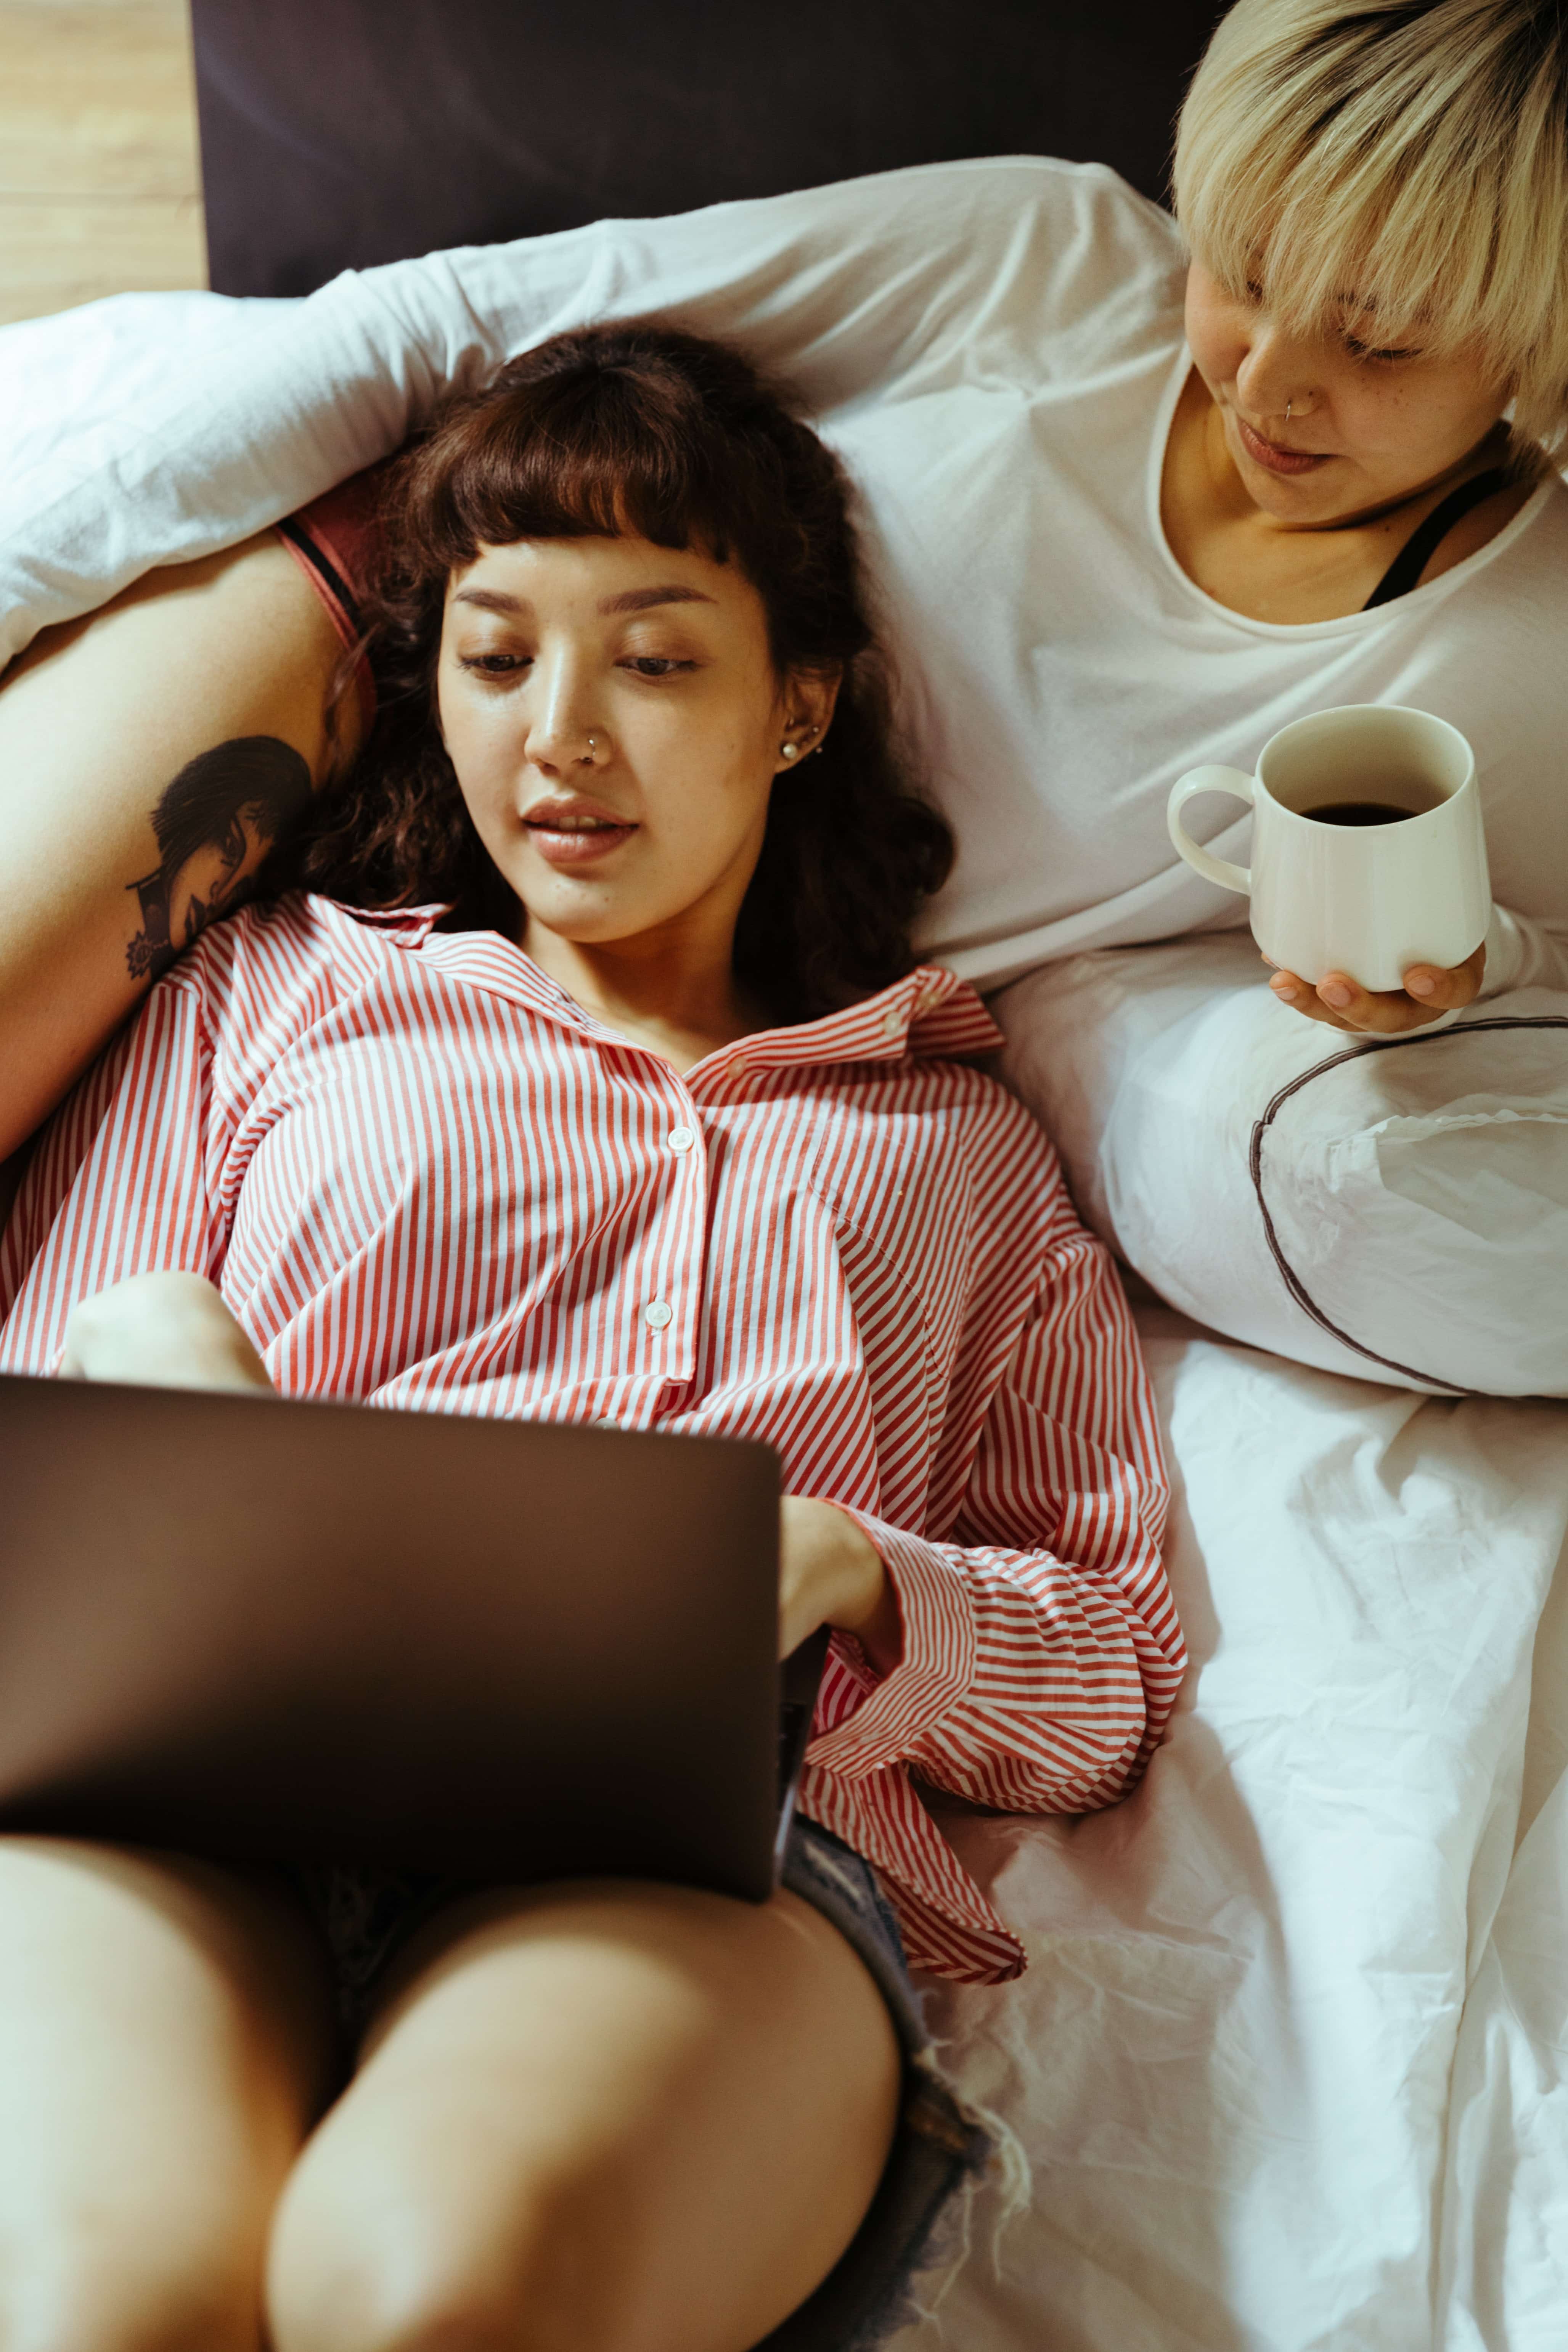 A queer couple relaxes in bed together. One is drinking a cup of coffee, while the other is using their laptop.